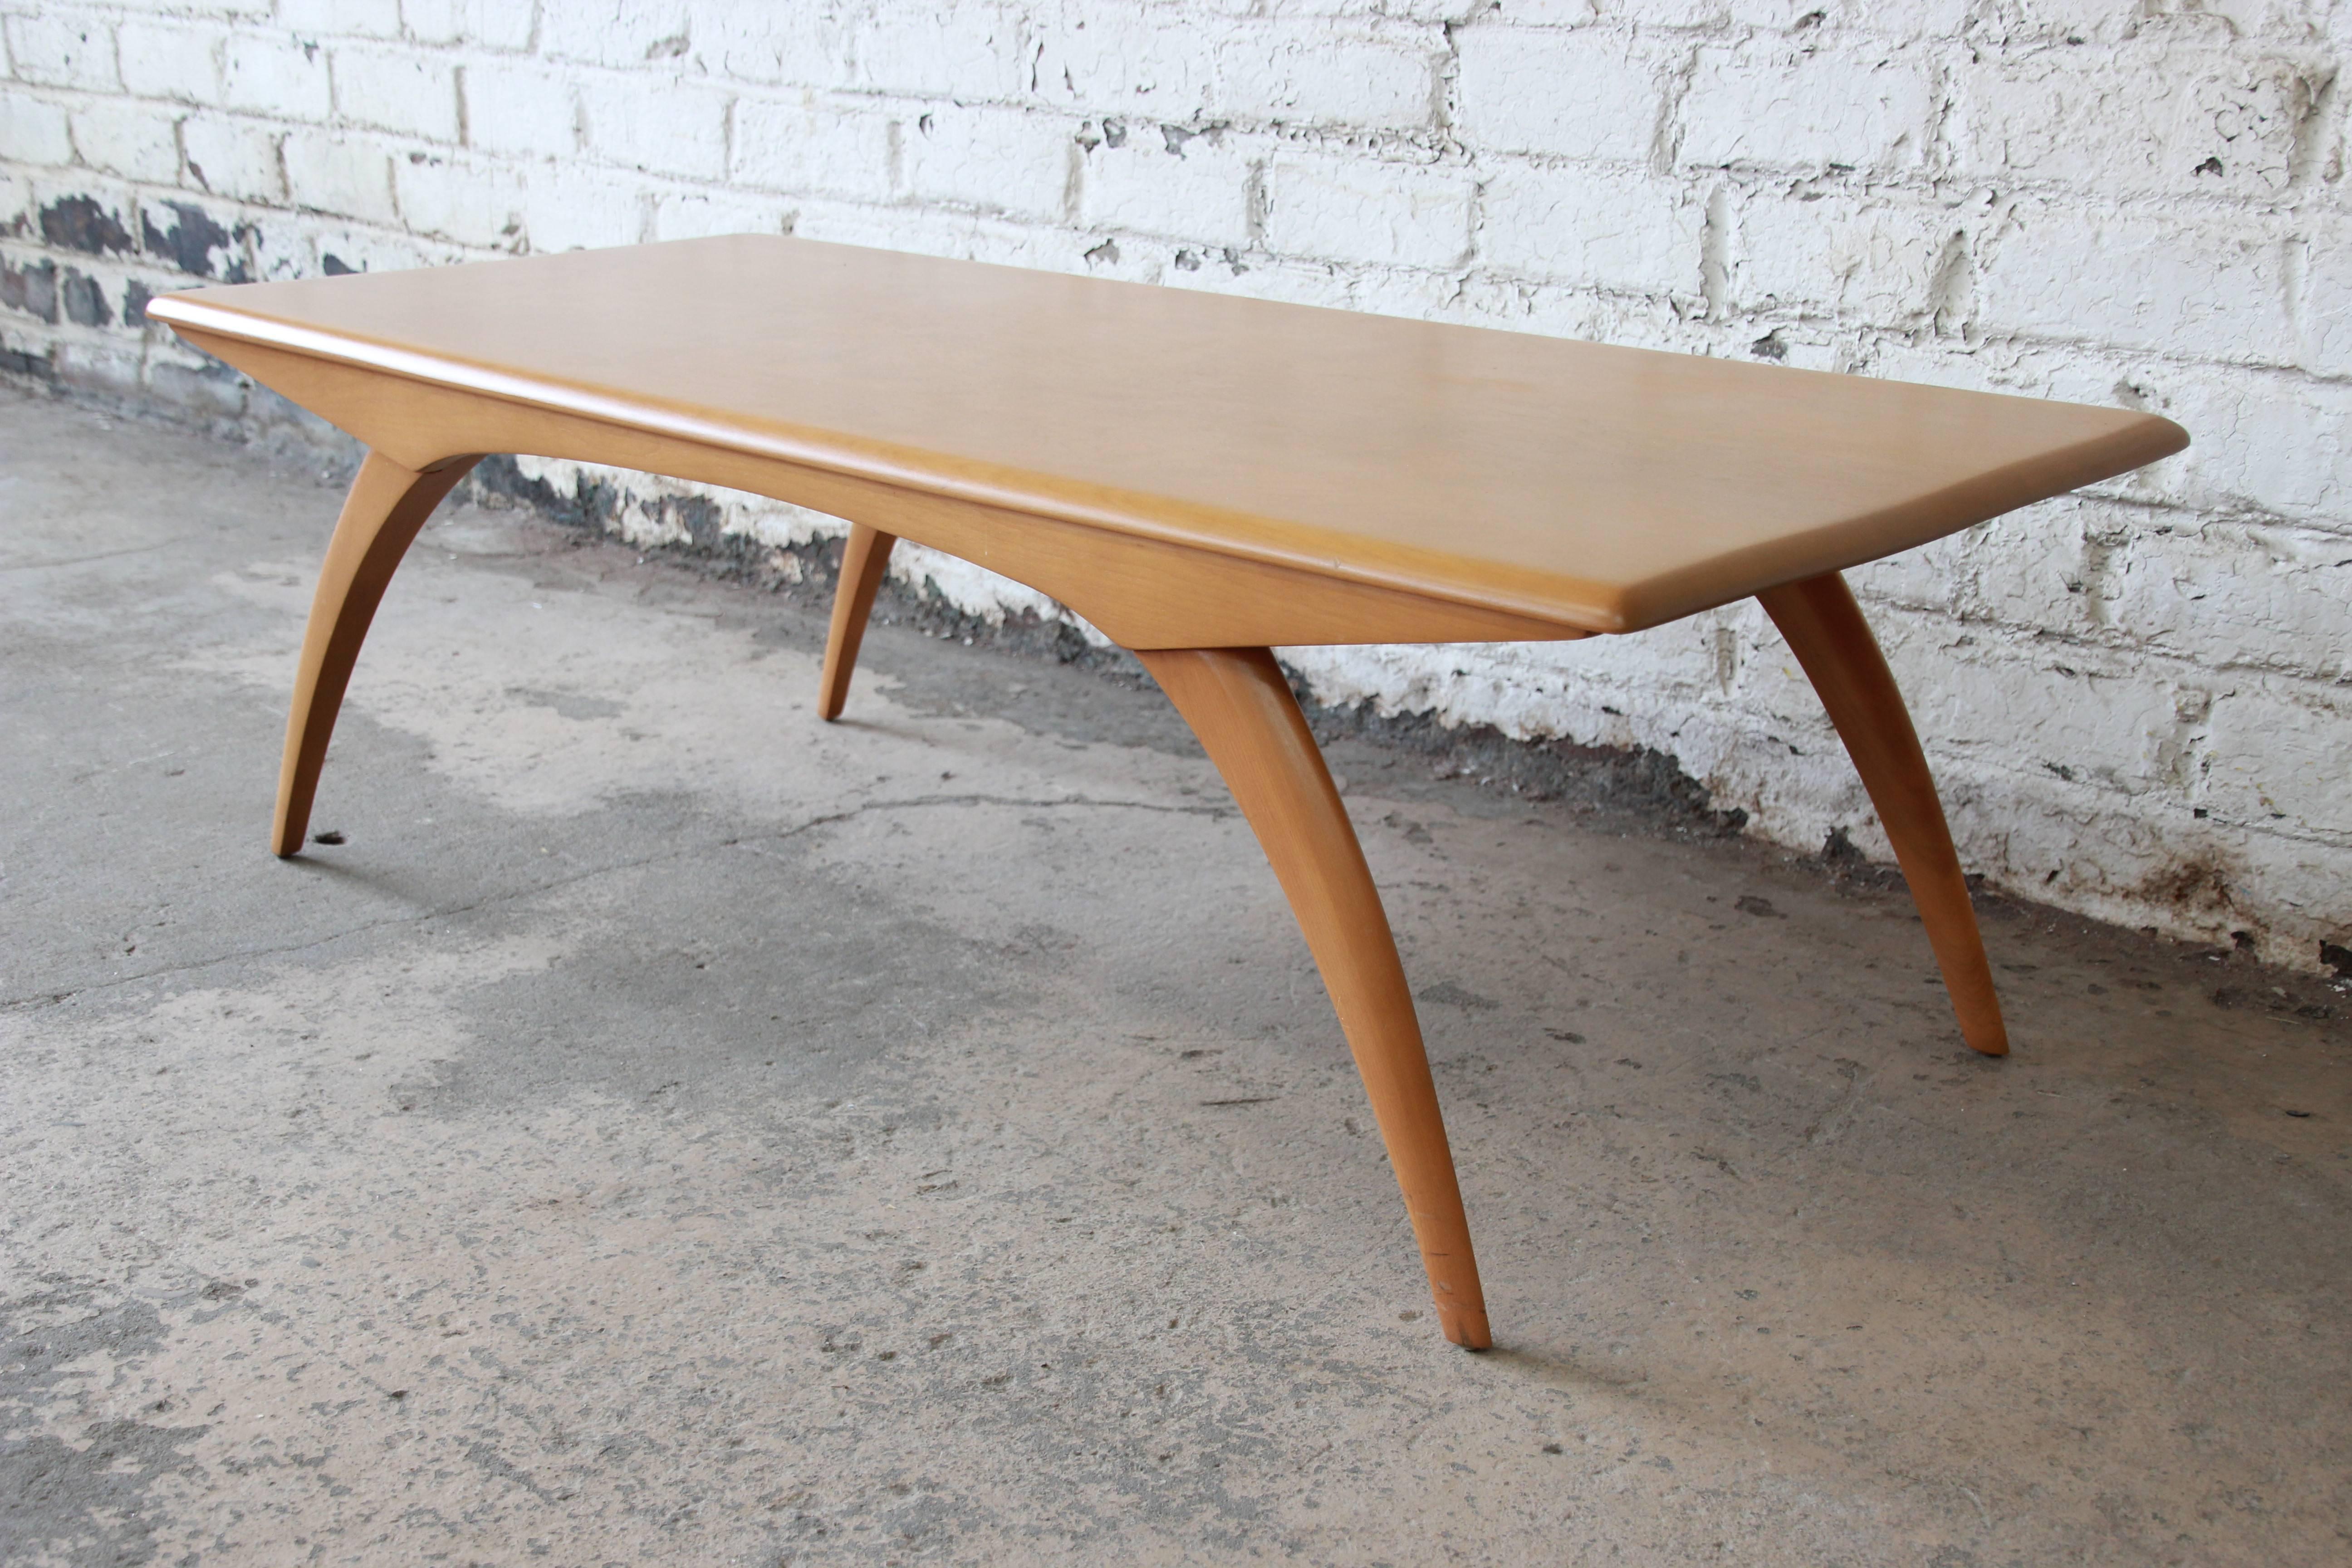 Offering an excellent original condition Heywood-Wakefield coffee table. The table has iconic wishbone legs that give the table a sleek Mid-Century Modern look. It has nice large surface that is in great original condition. Very minor wear from age